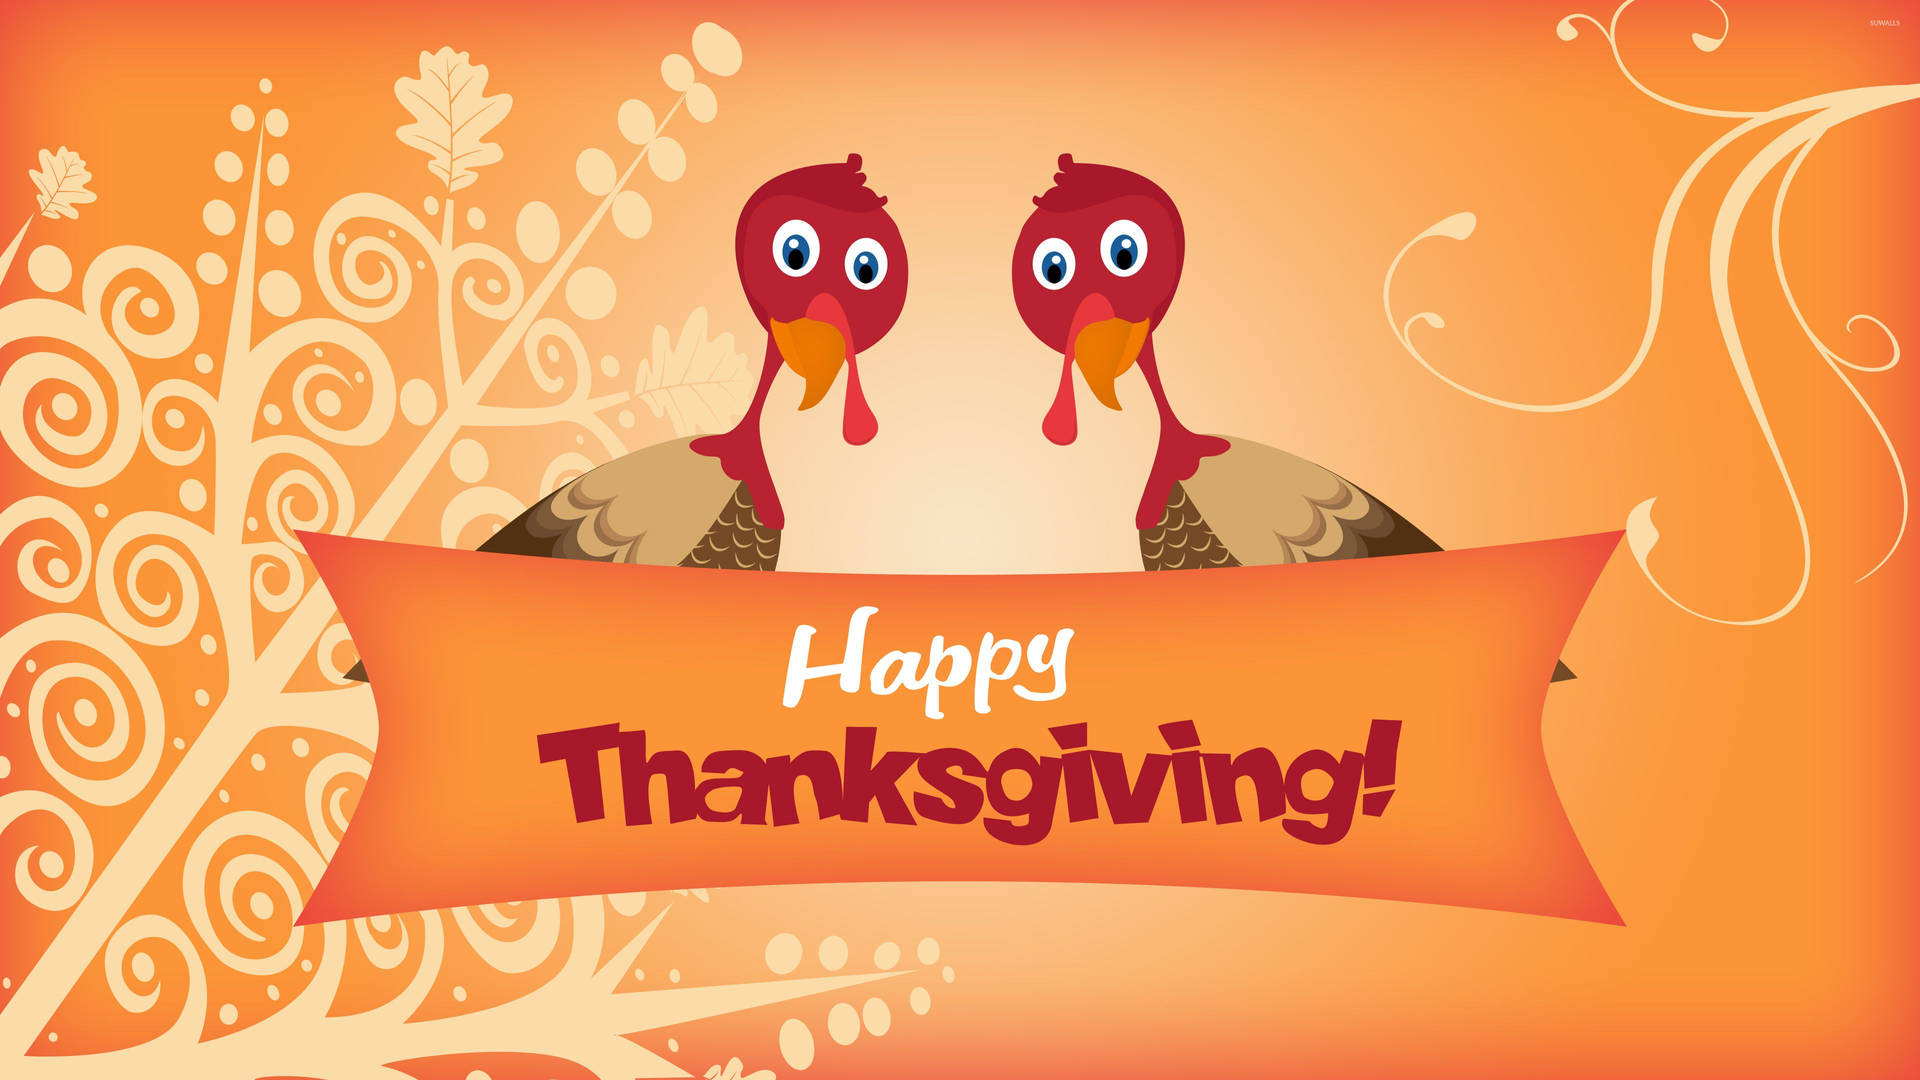 Get Ready for Thanksgiving Dinner with these Two Tasty Turkeys! Wallpaper